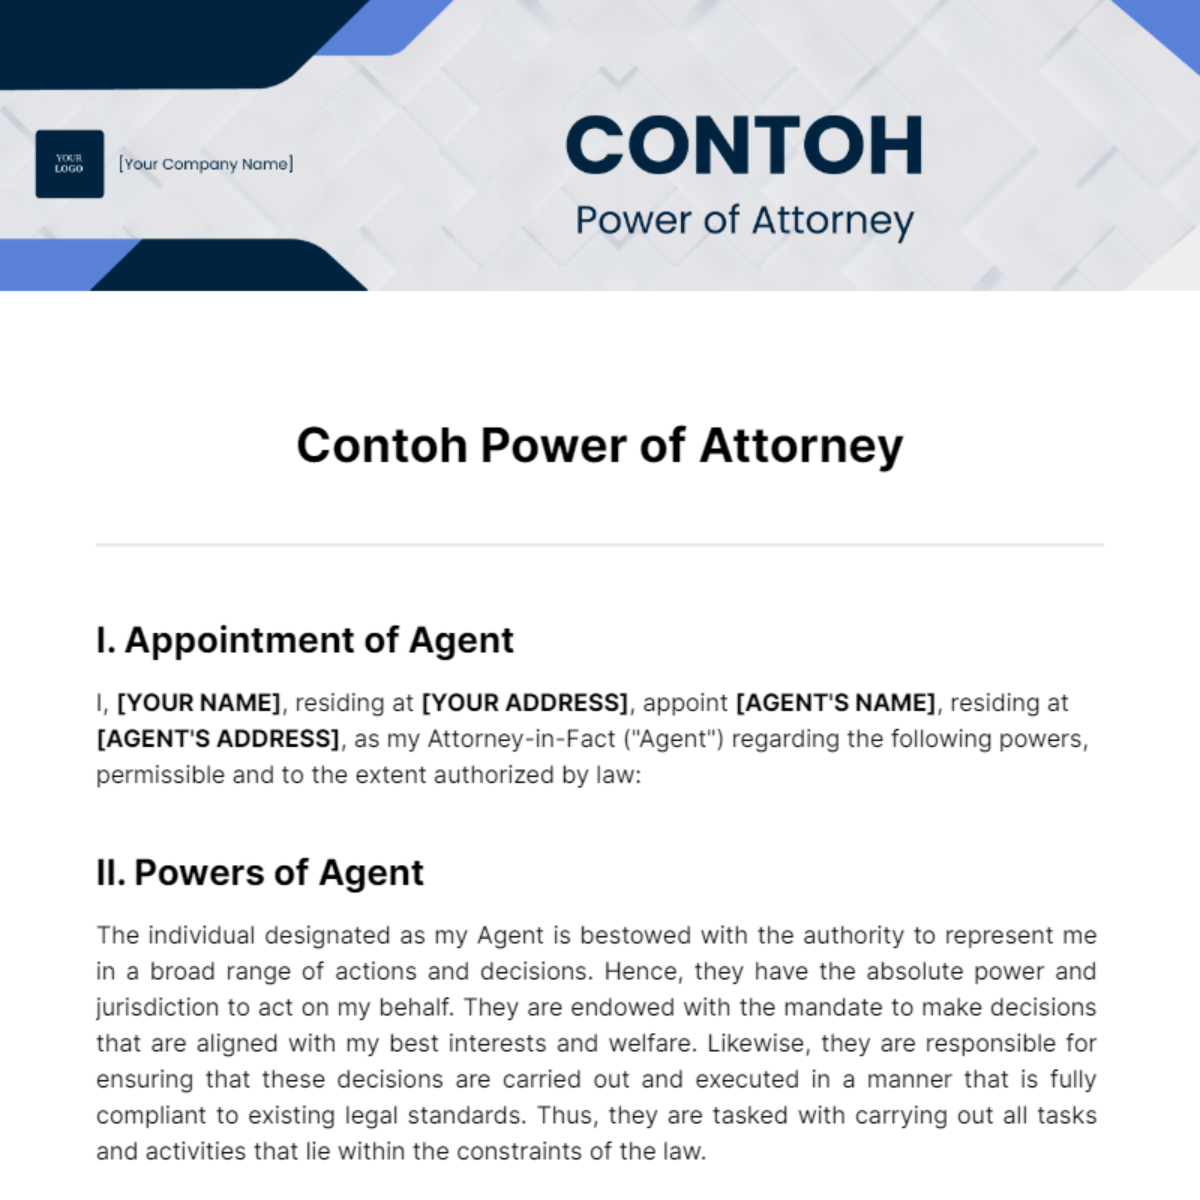 Contoh Power of Attorney Template